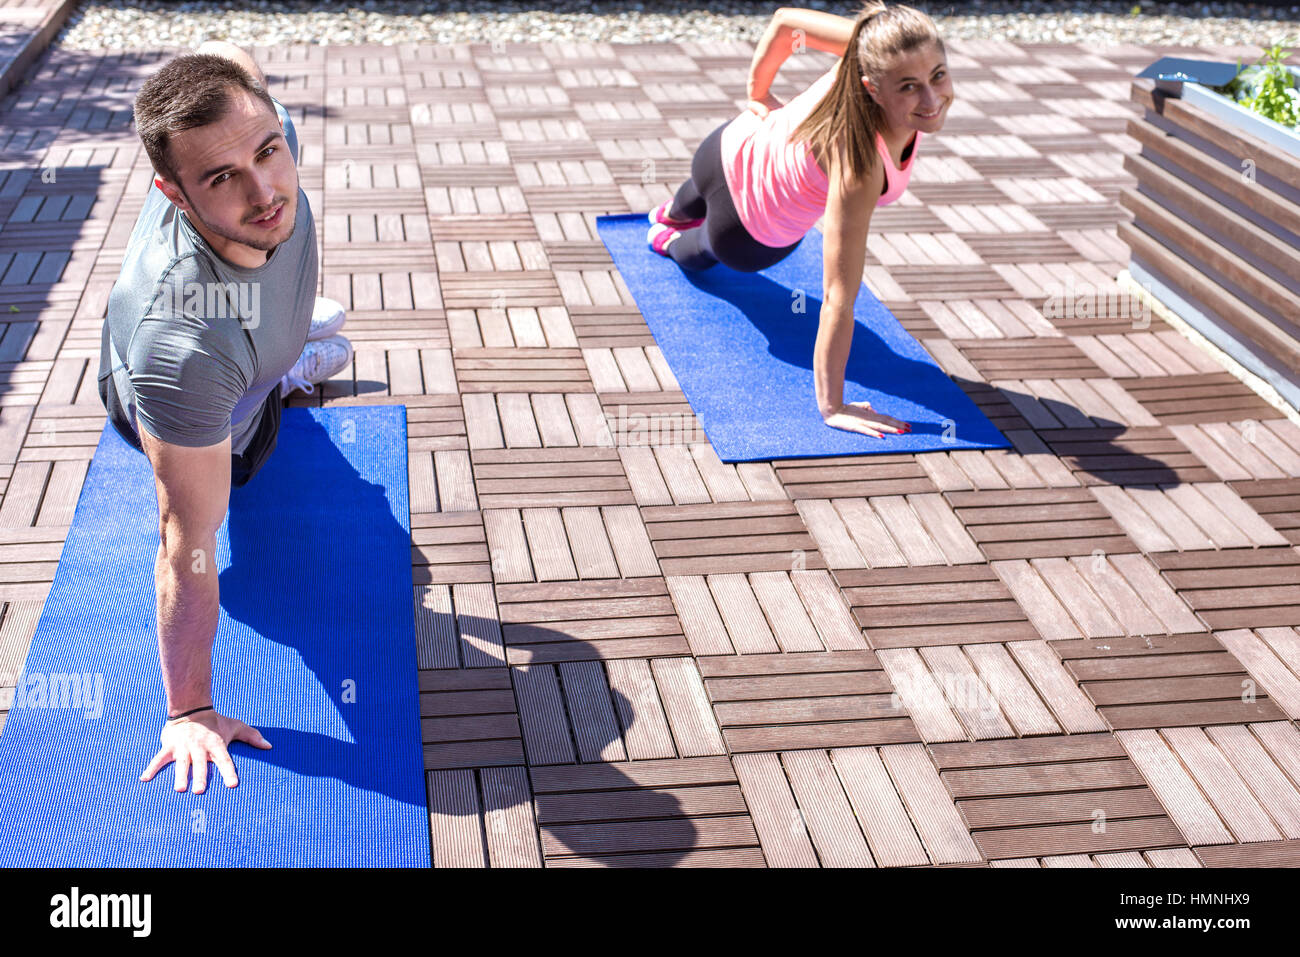 Young couple doing together side plank exercise on the rooftop, outdoors. Stock Photo